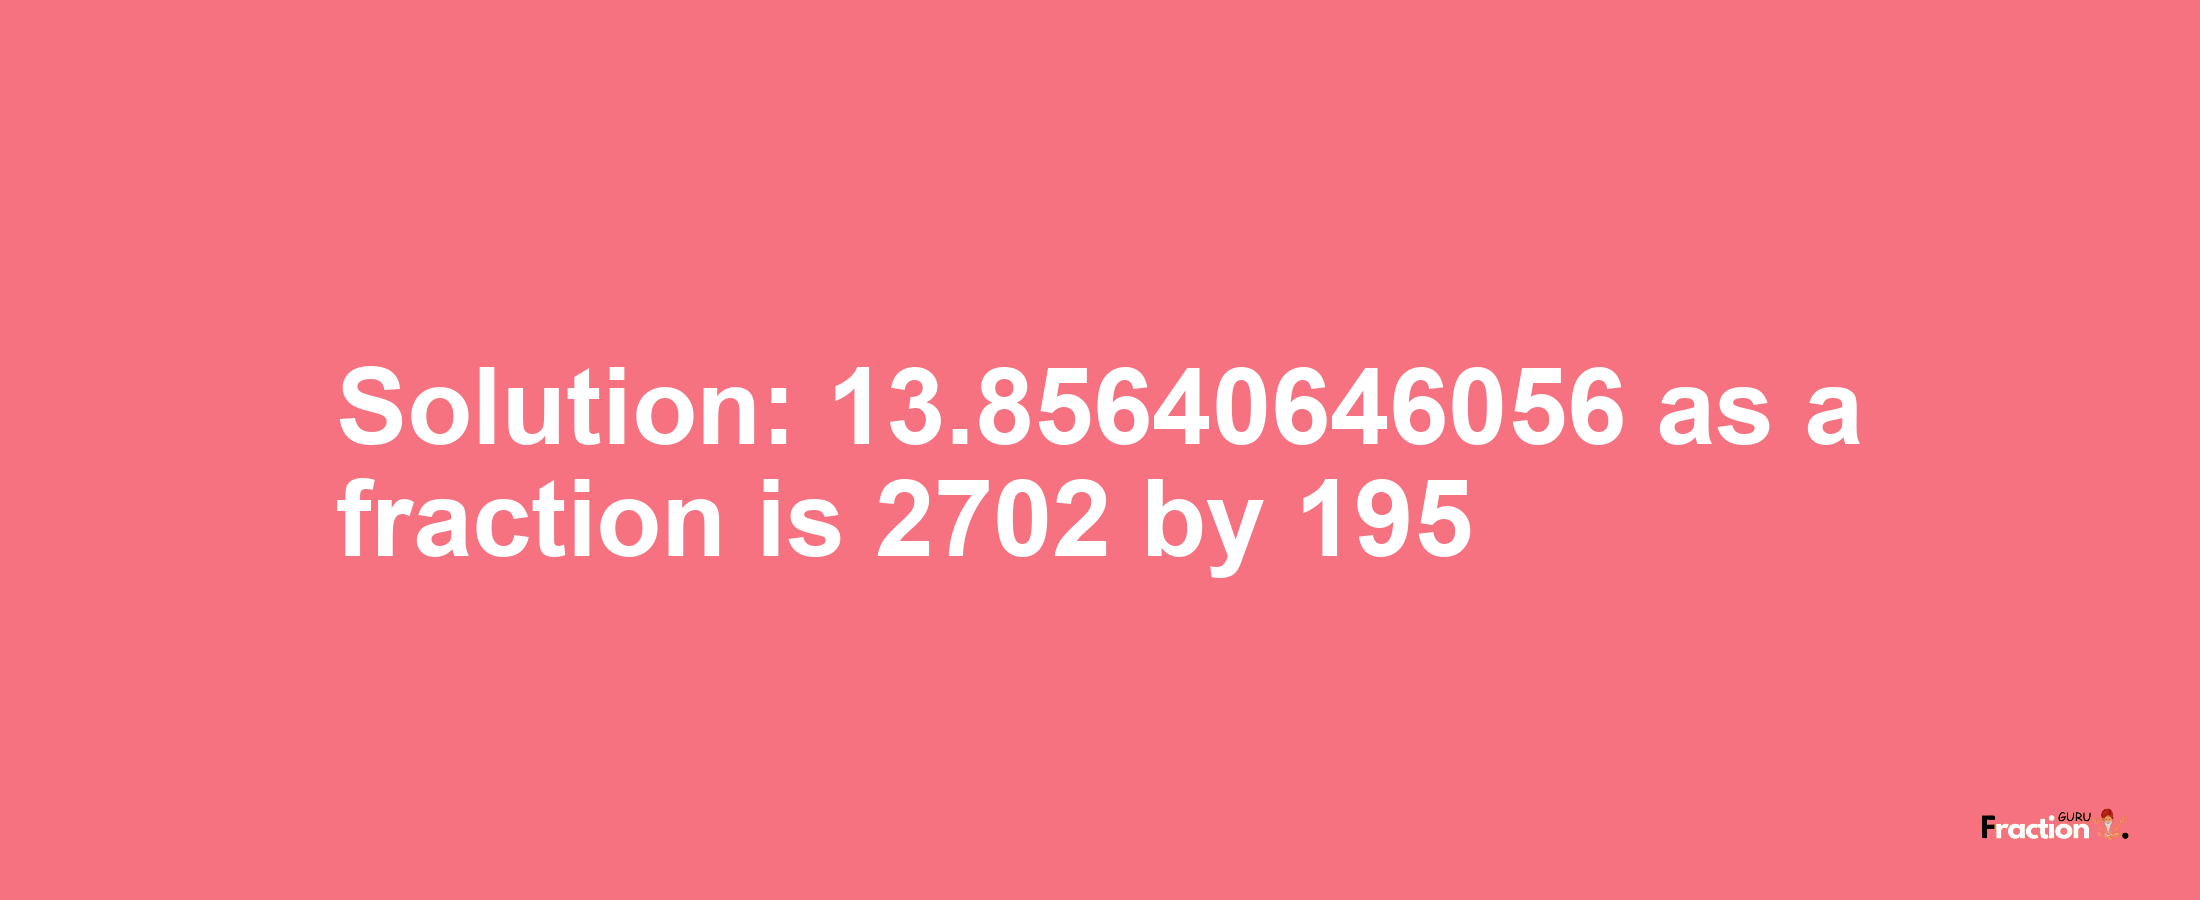 Solution:13.85640646056 as a fraction is 2702/195